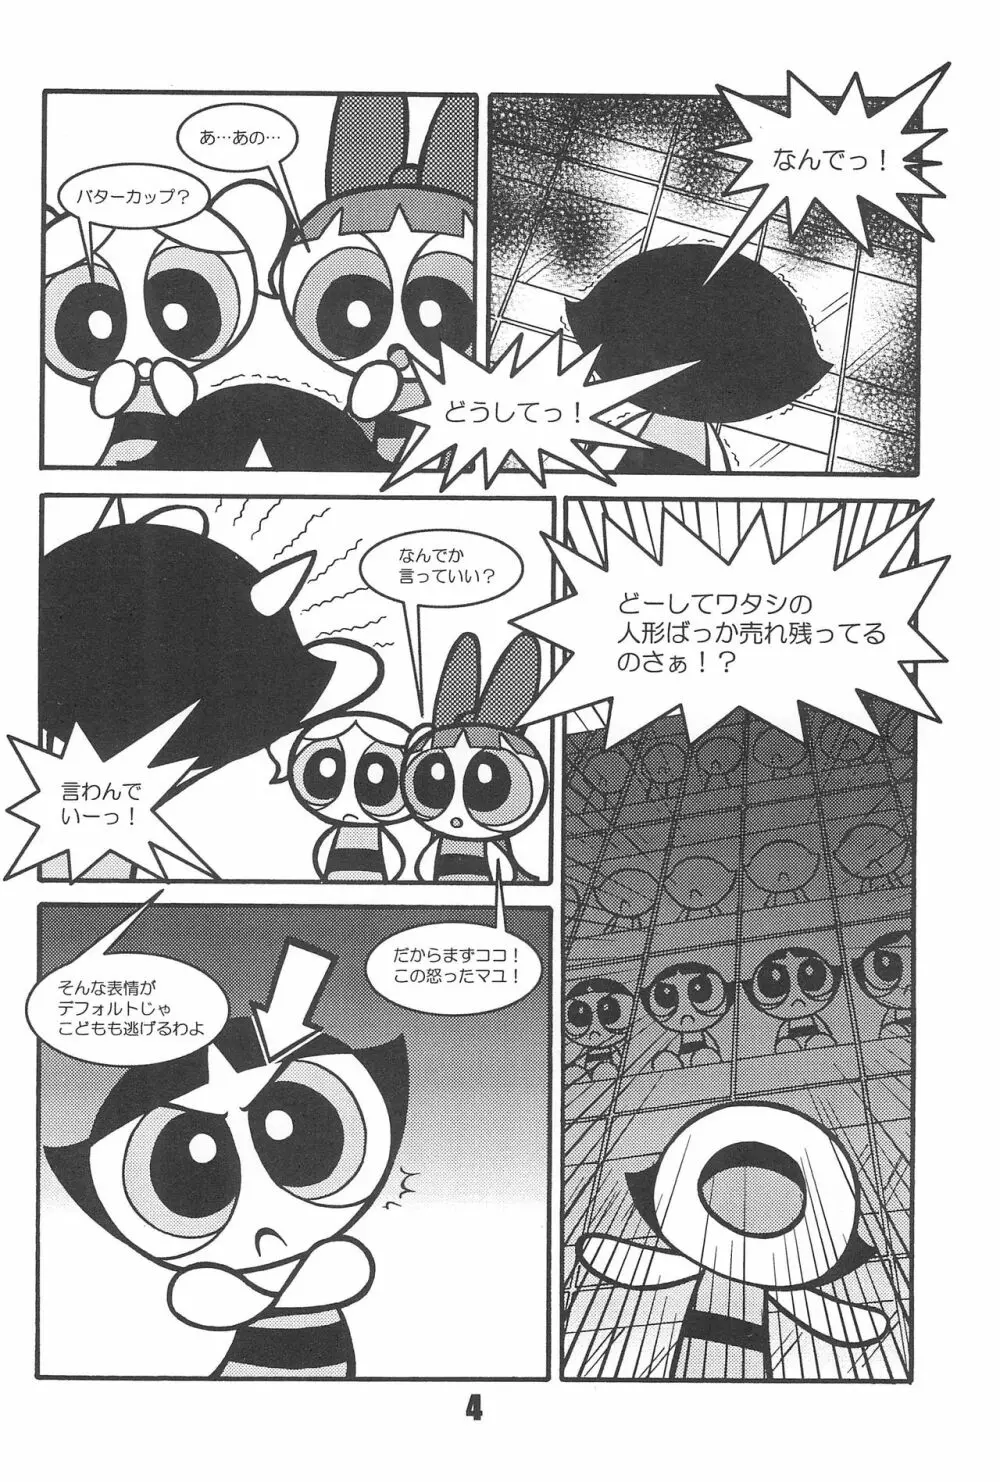 Show Goes On! Funhouse 22th Page.4